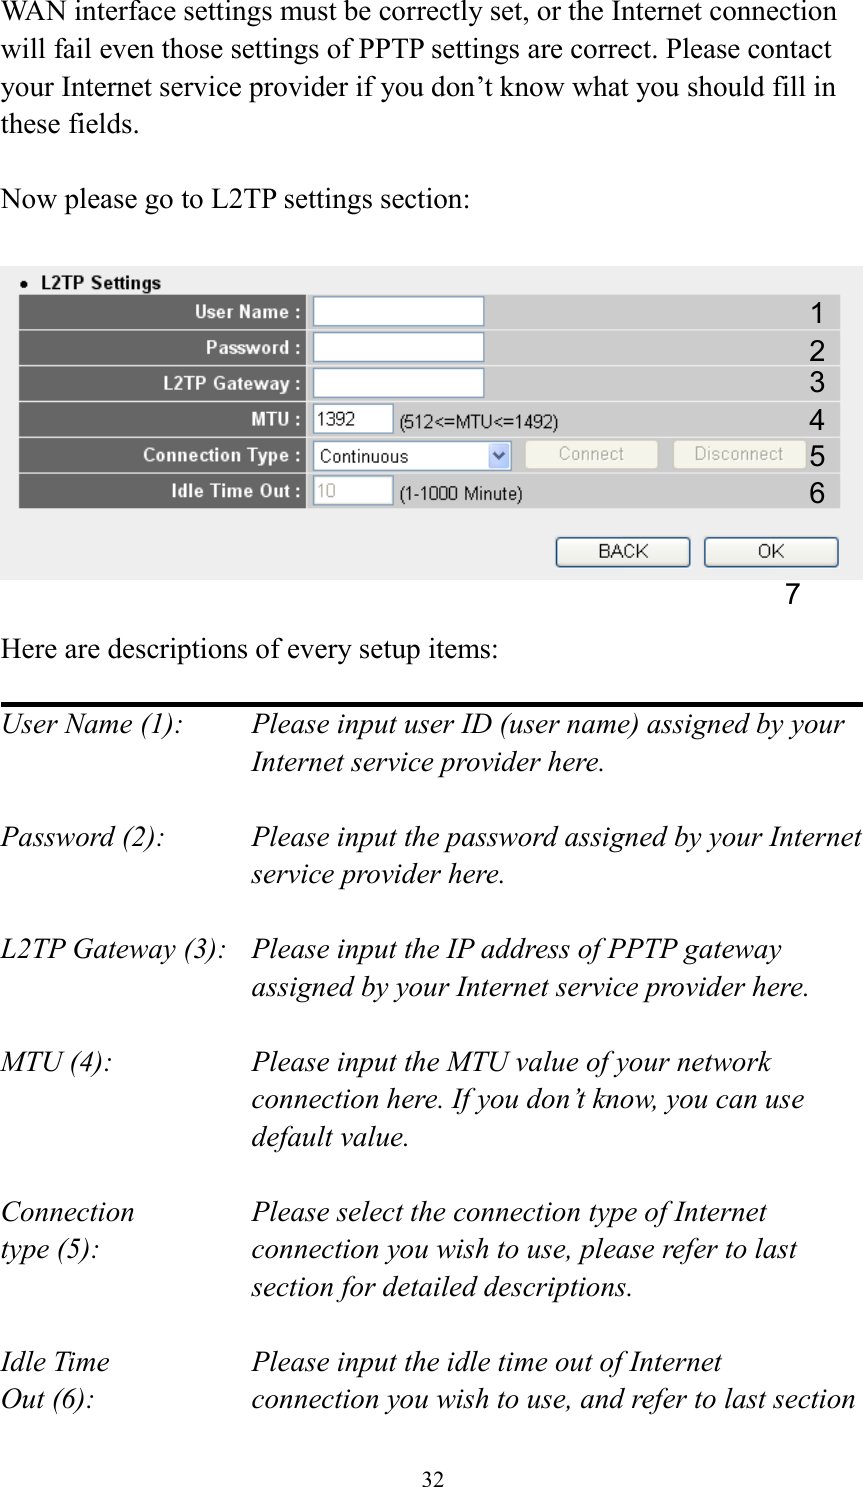 32 WAN interface settings must be correctly set, or the Internet connection will fail even those settings of PPTP settings are correct. Please contact your Internet service provider if you don’t know what you should fill in these fields.  Now please go to L2TP settings section:    Here are descriptions of every setup items:  User Name (1):     Please input user ID (user name) assigned by your           Internet service provider here.  Password (2):    Please input the password assigned by your Internet service provider here.  L2TP Gateway (3):   Please input the IP address of PPTP gateway assigned by your Internet service provider here.  MTU (4):    Please input the MTU value of your network connection here. If you don’t know, you can use default value.  Connection       Please select the connection type of Internet type (5):    connection you wish to use, please refer to last section for detailed descriptions.  Idle Time        Please input the idle time out of Internet Out (6):    connection you wish to use, and refer to last section 1 2 4 3 5 7 6 